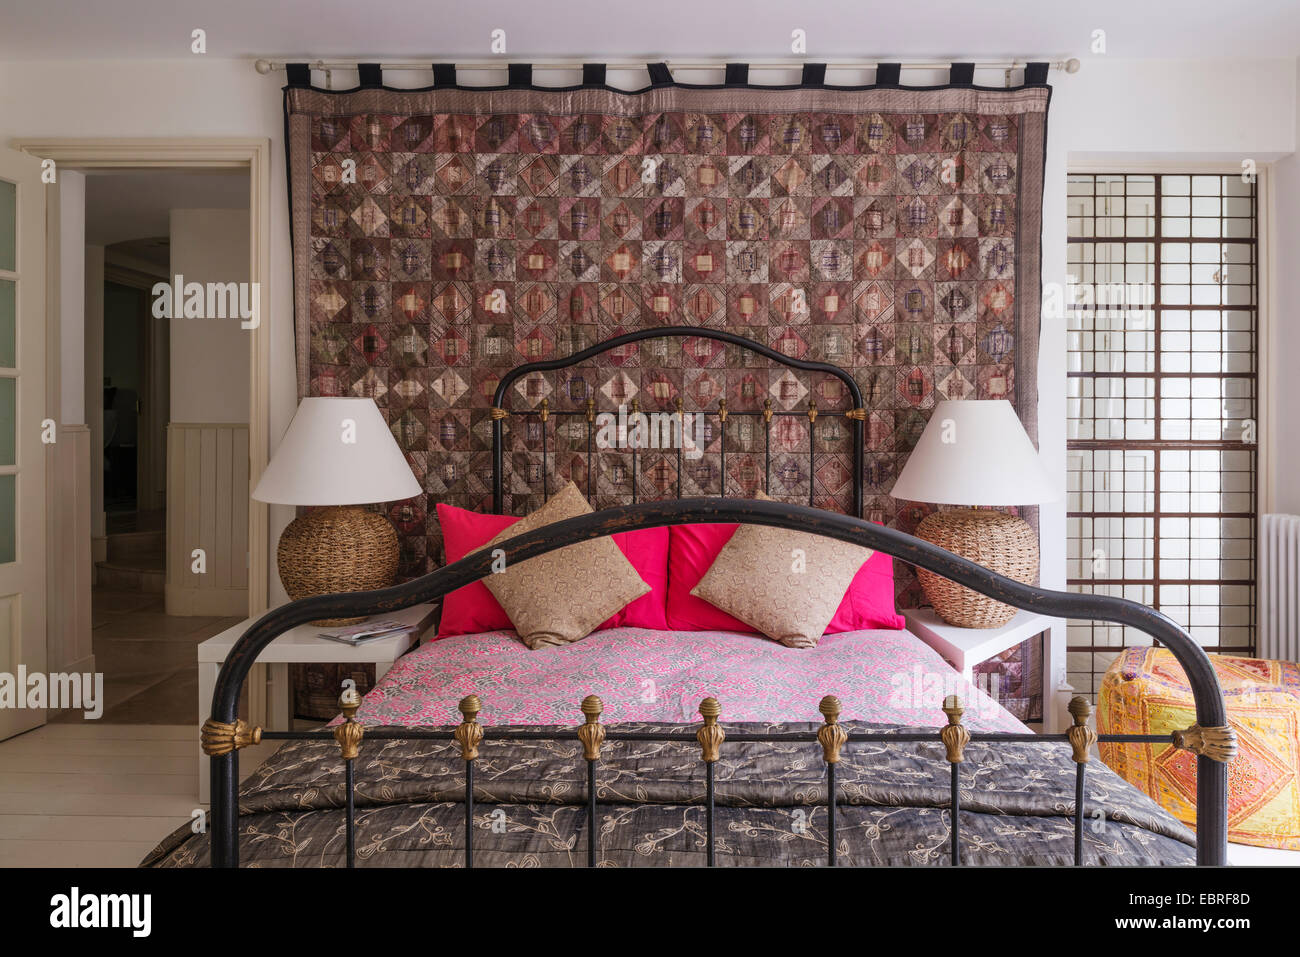 Patchwork wall hanging with metal framed bed in North London home Stock Photo